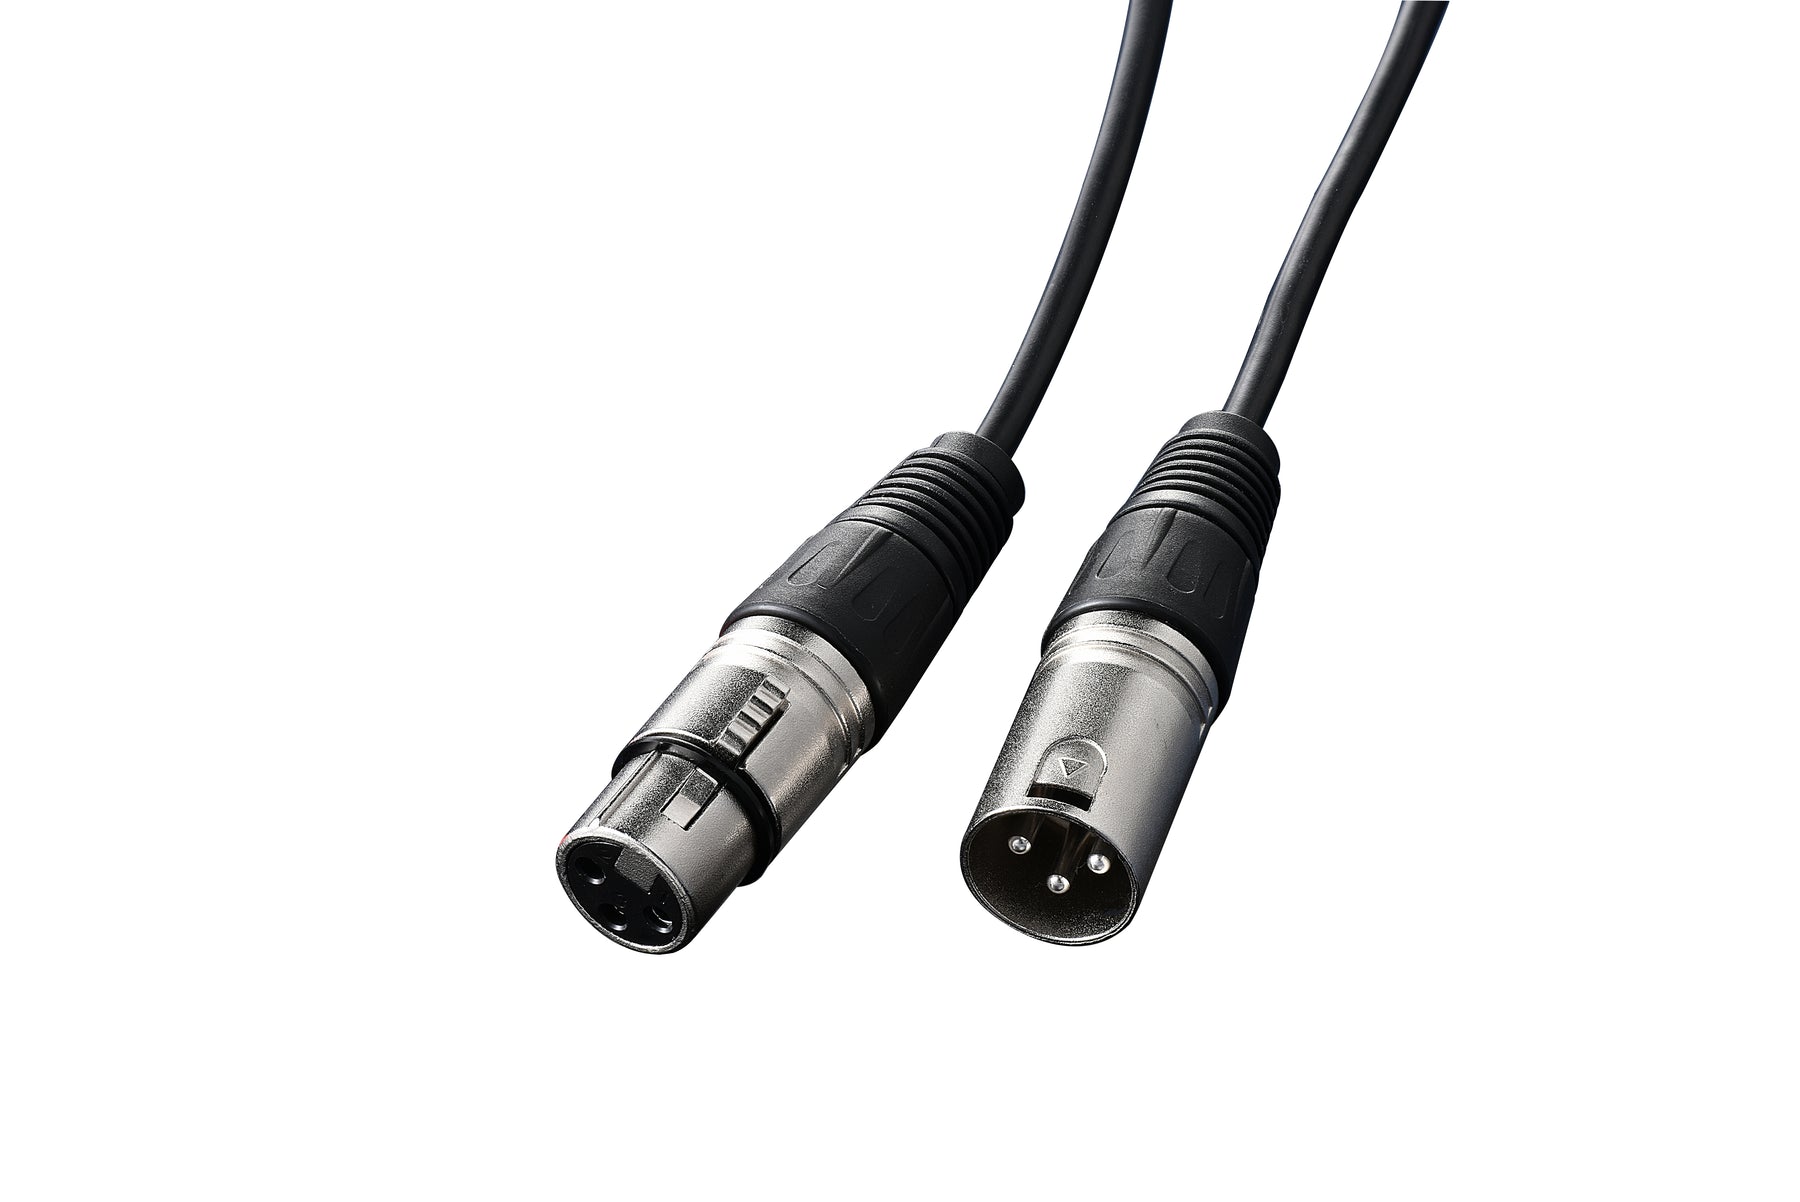 IBRA XLR Mic Cable Premium Quality Pro Microphone Lead | Balanced Male XLR to Female XLR | 7.5 Metre | Clearer Sound for PA Systems, Studio Recording, Mixers, Amplification & Speakers - BLACK